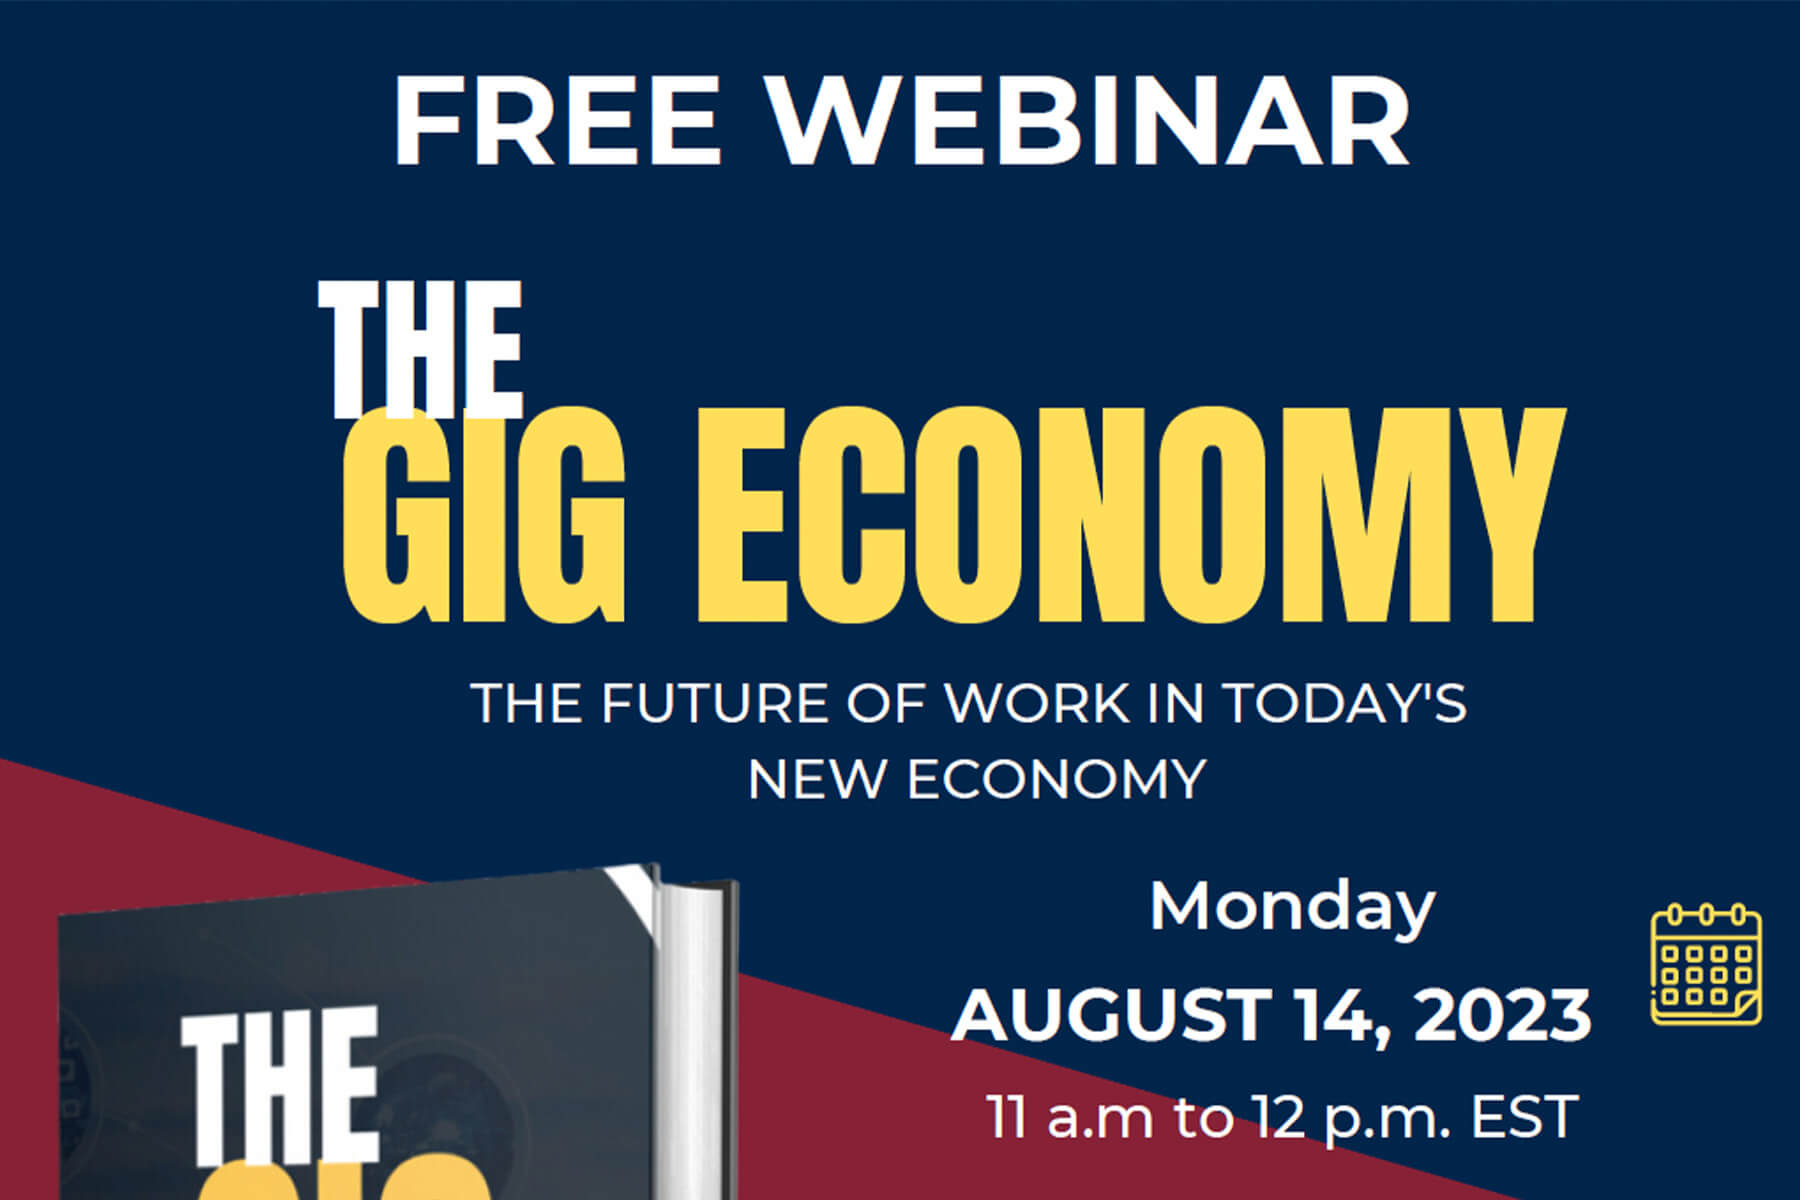 Institute For Entrepreneurship Hosts Free Webinar On The Gig Economy, Aug. 14 Learn How To Make The Most Of What May Be The Future Of Work